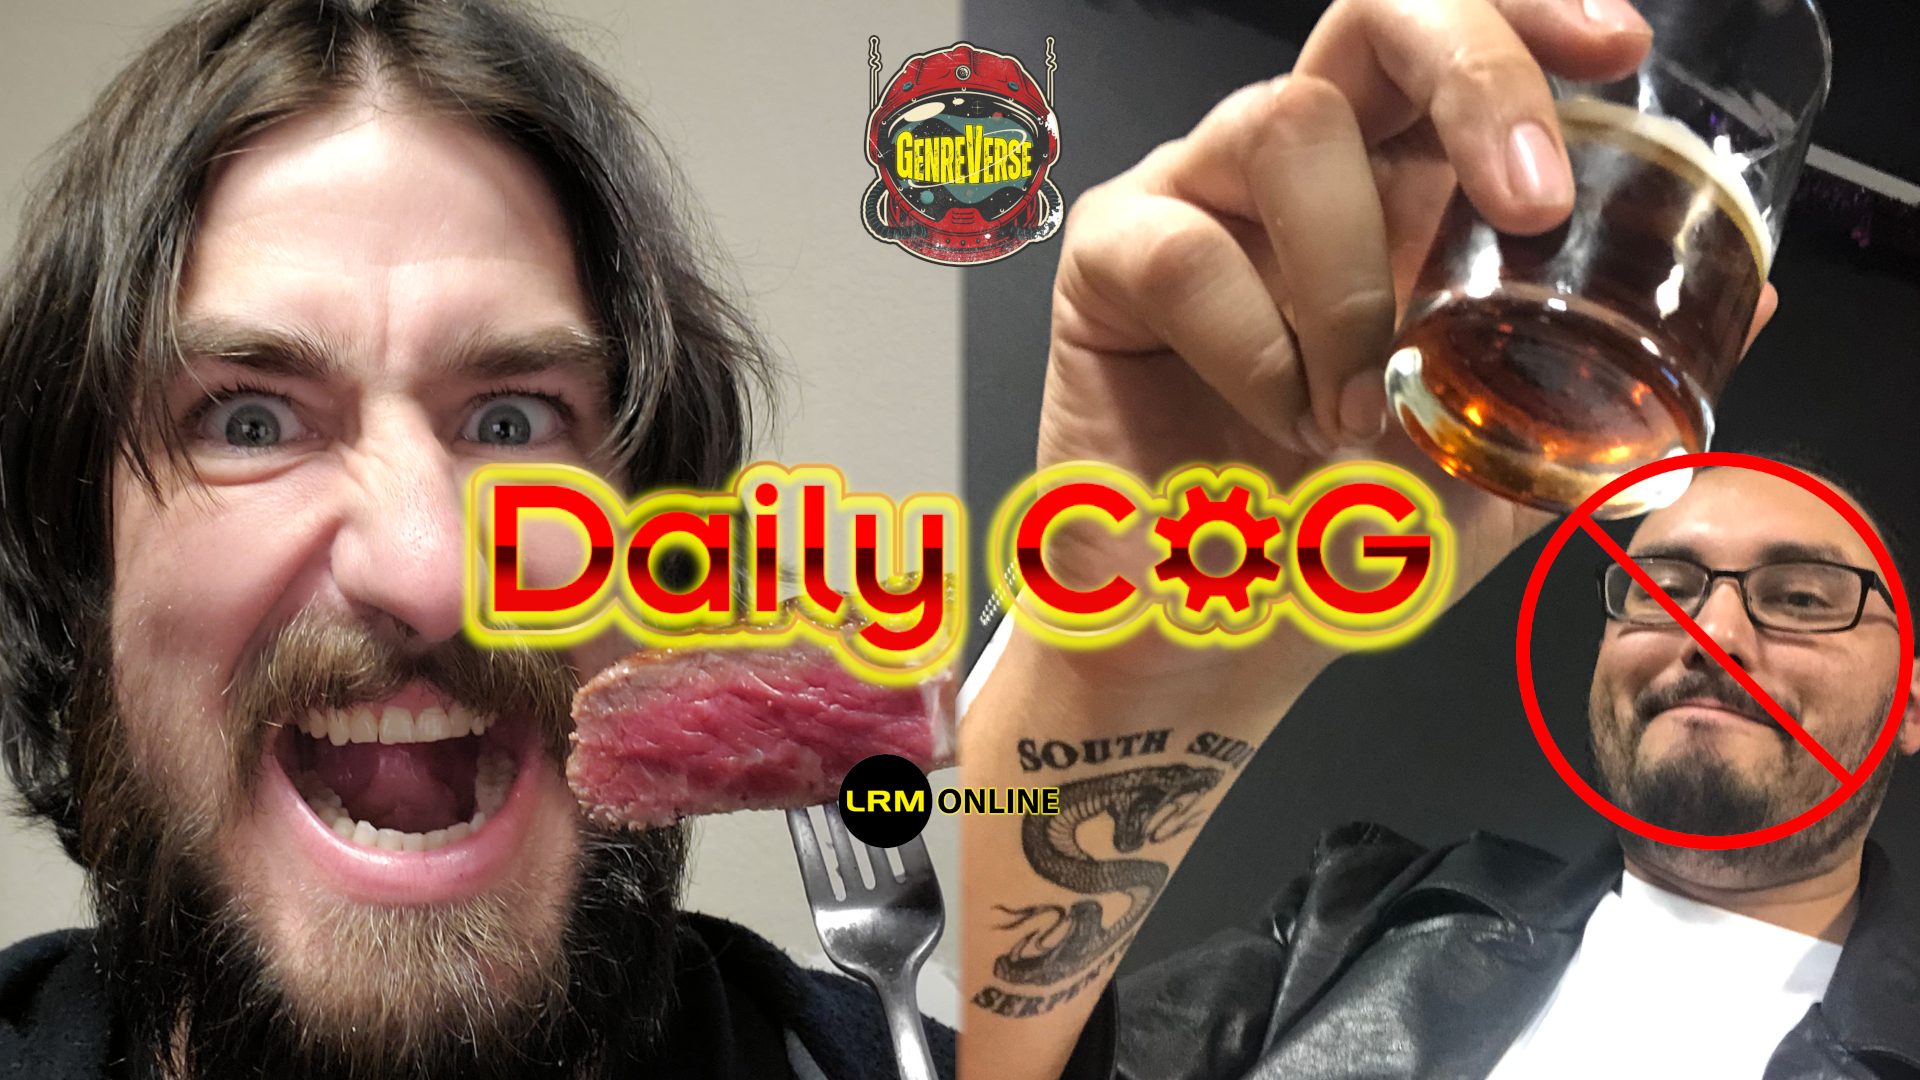 MCU Multiverse Rumors & Theories, Star Wars News, And Did Disney+ Prove Day-And-Date Releases Are Bad... IT'S LIVE!!! Daily COG